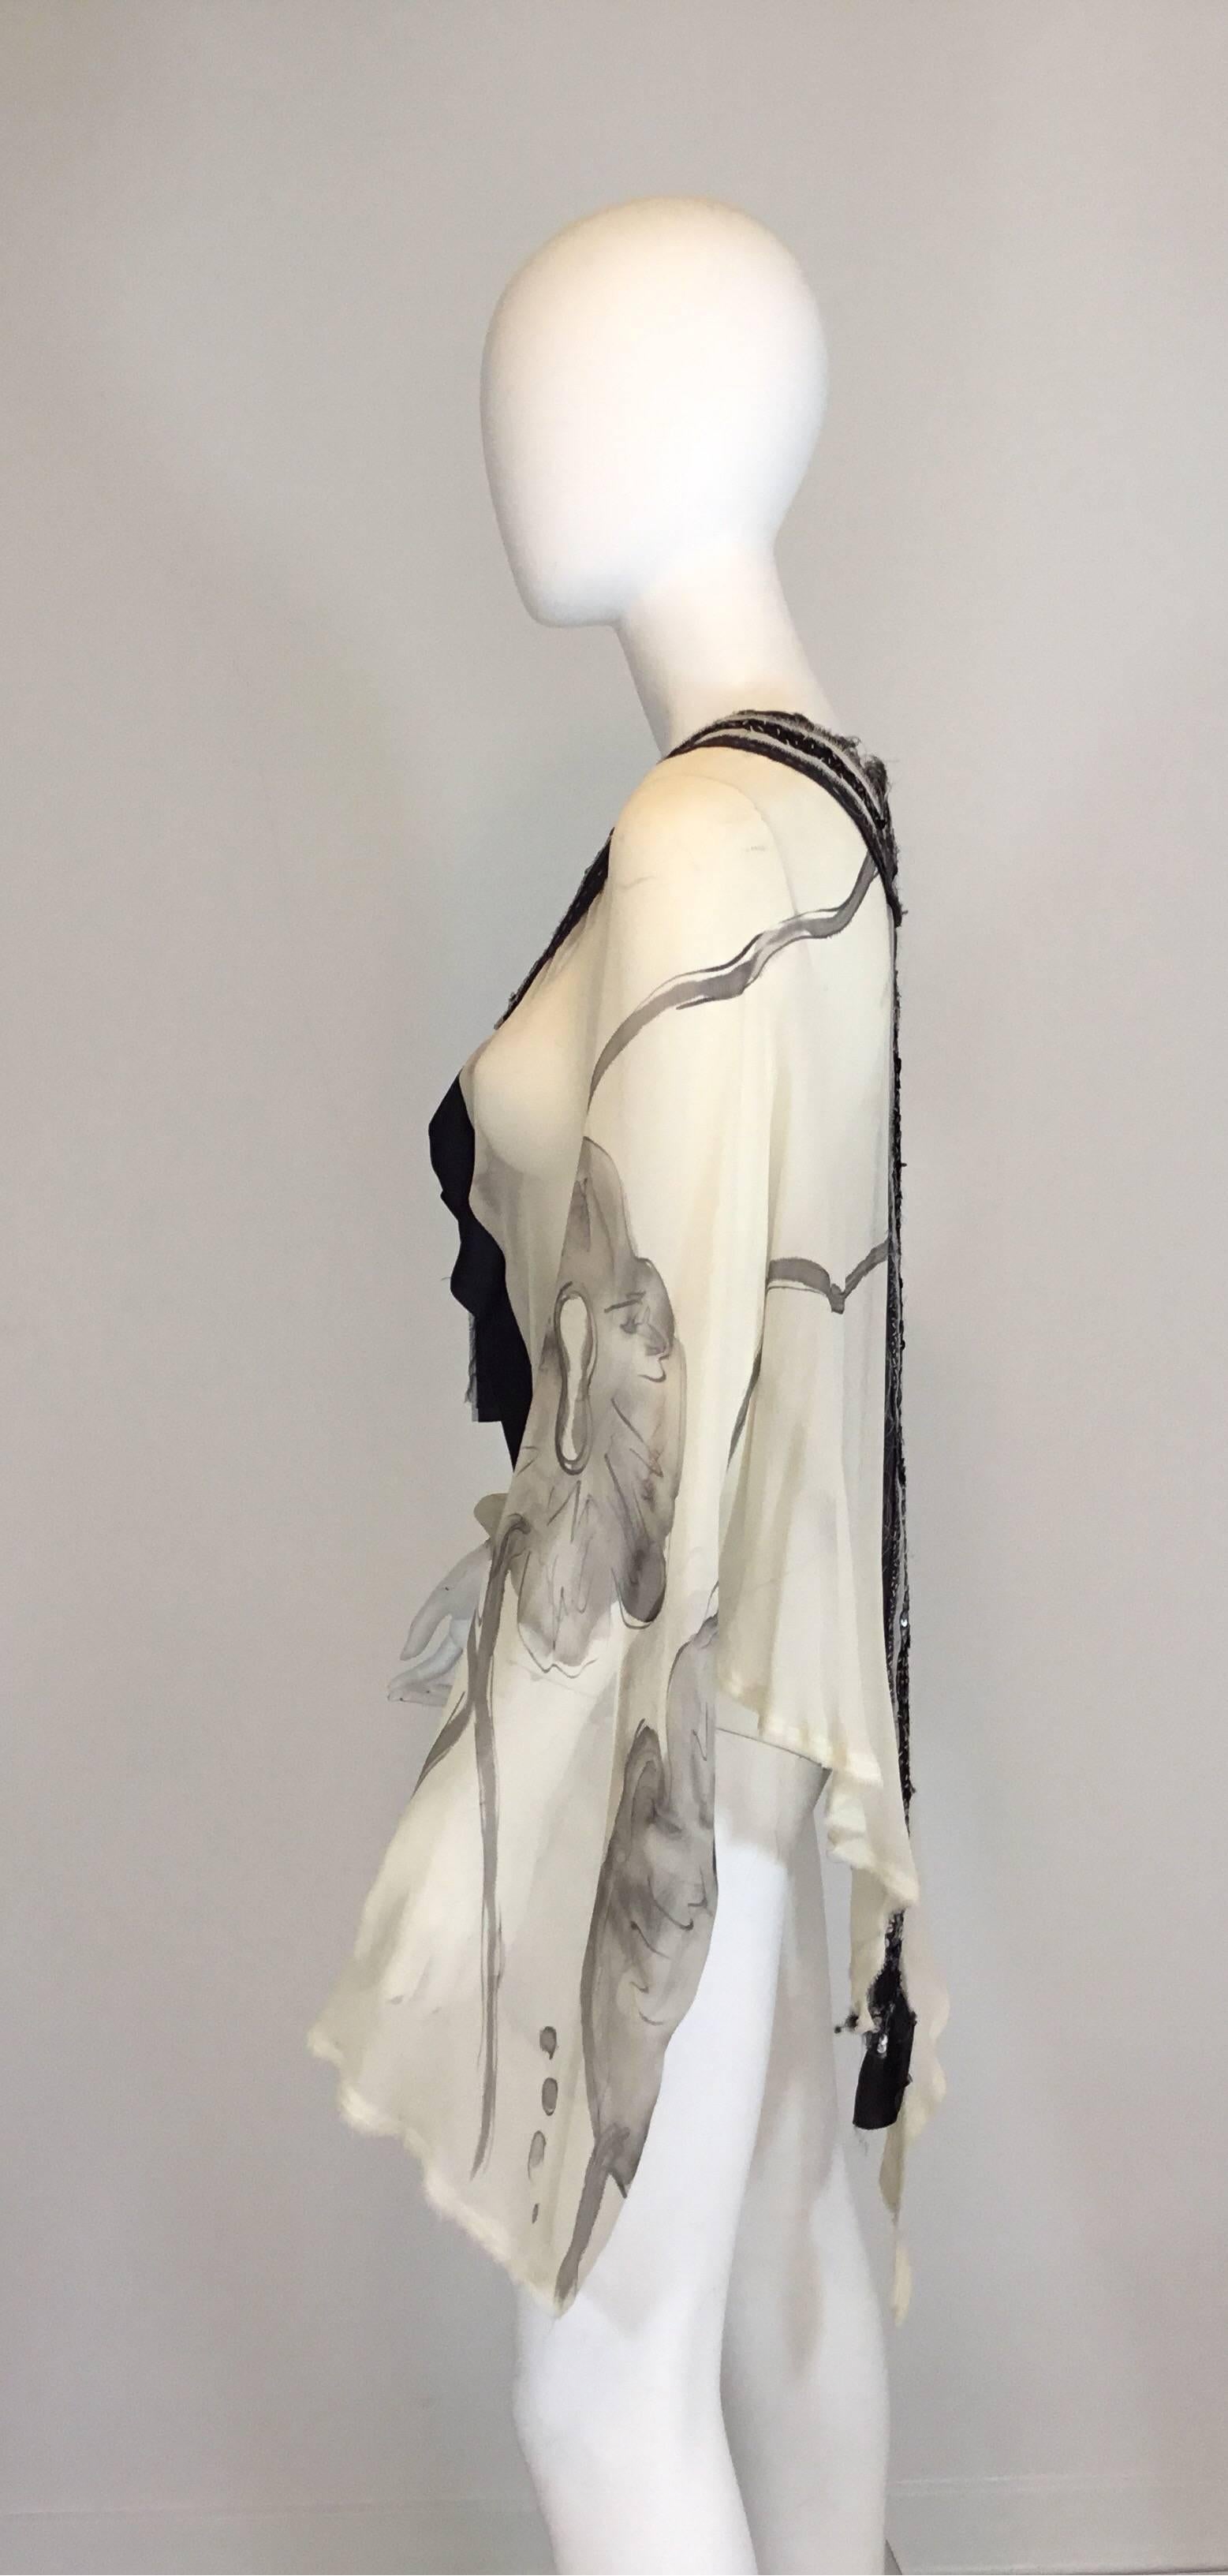 Antonio Marras silk handmade shrug features an embellished trim with sequins and light beading, ribbon tie closure at the neck, hand dyed chiffon and hand stitching. Shrug/shawl is labeled a size 42, 100% silk, and is made in Italy.

Pit to pit-